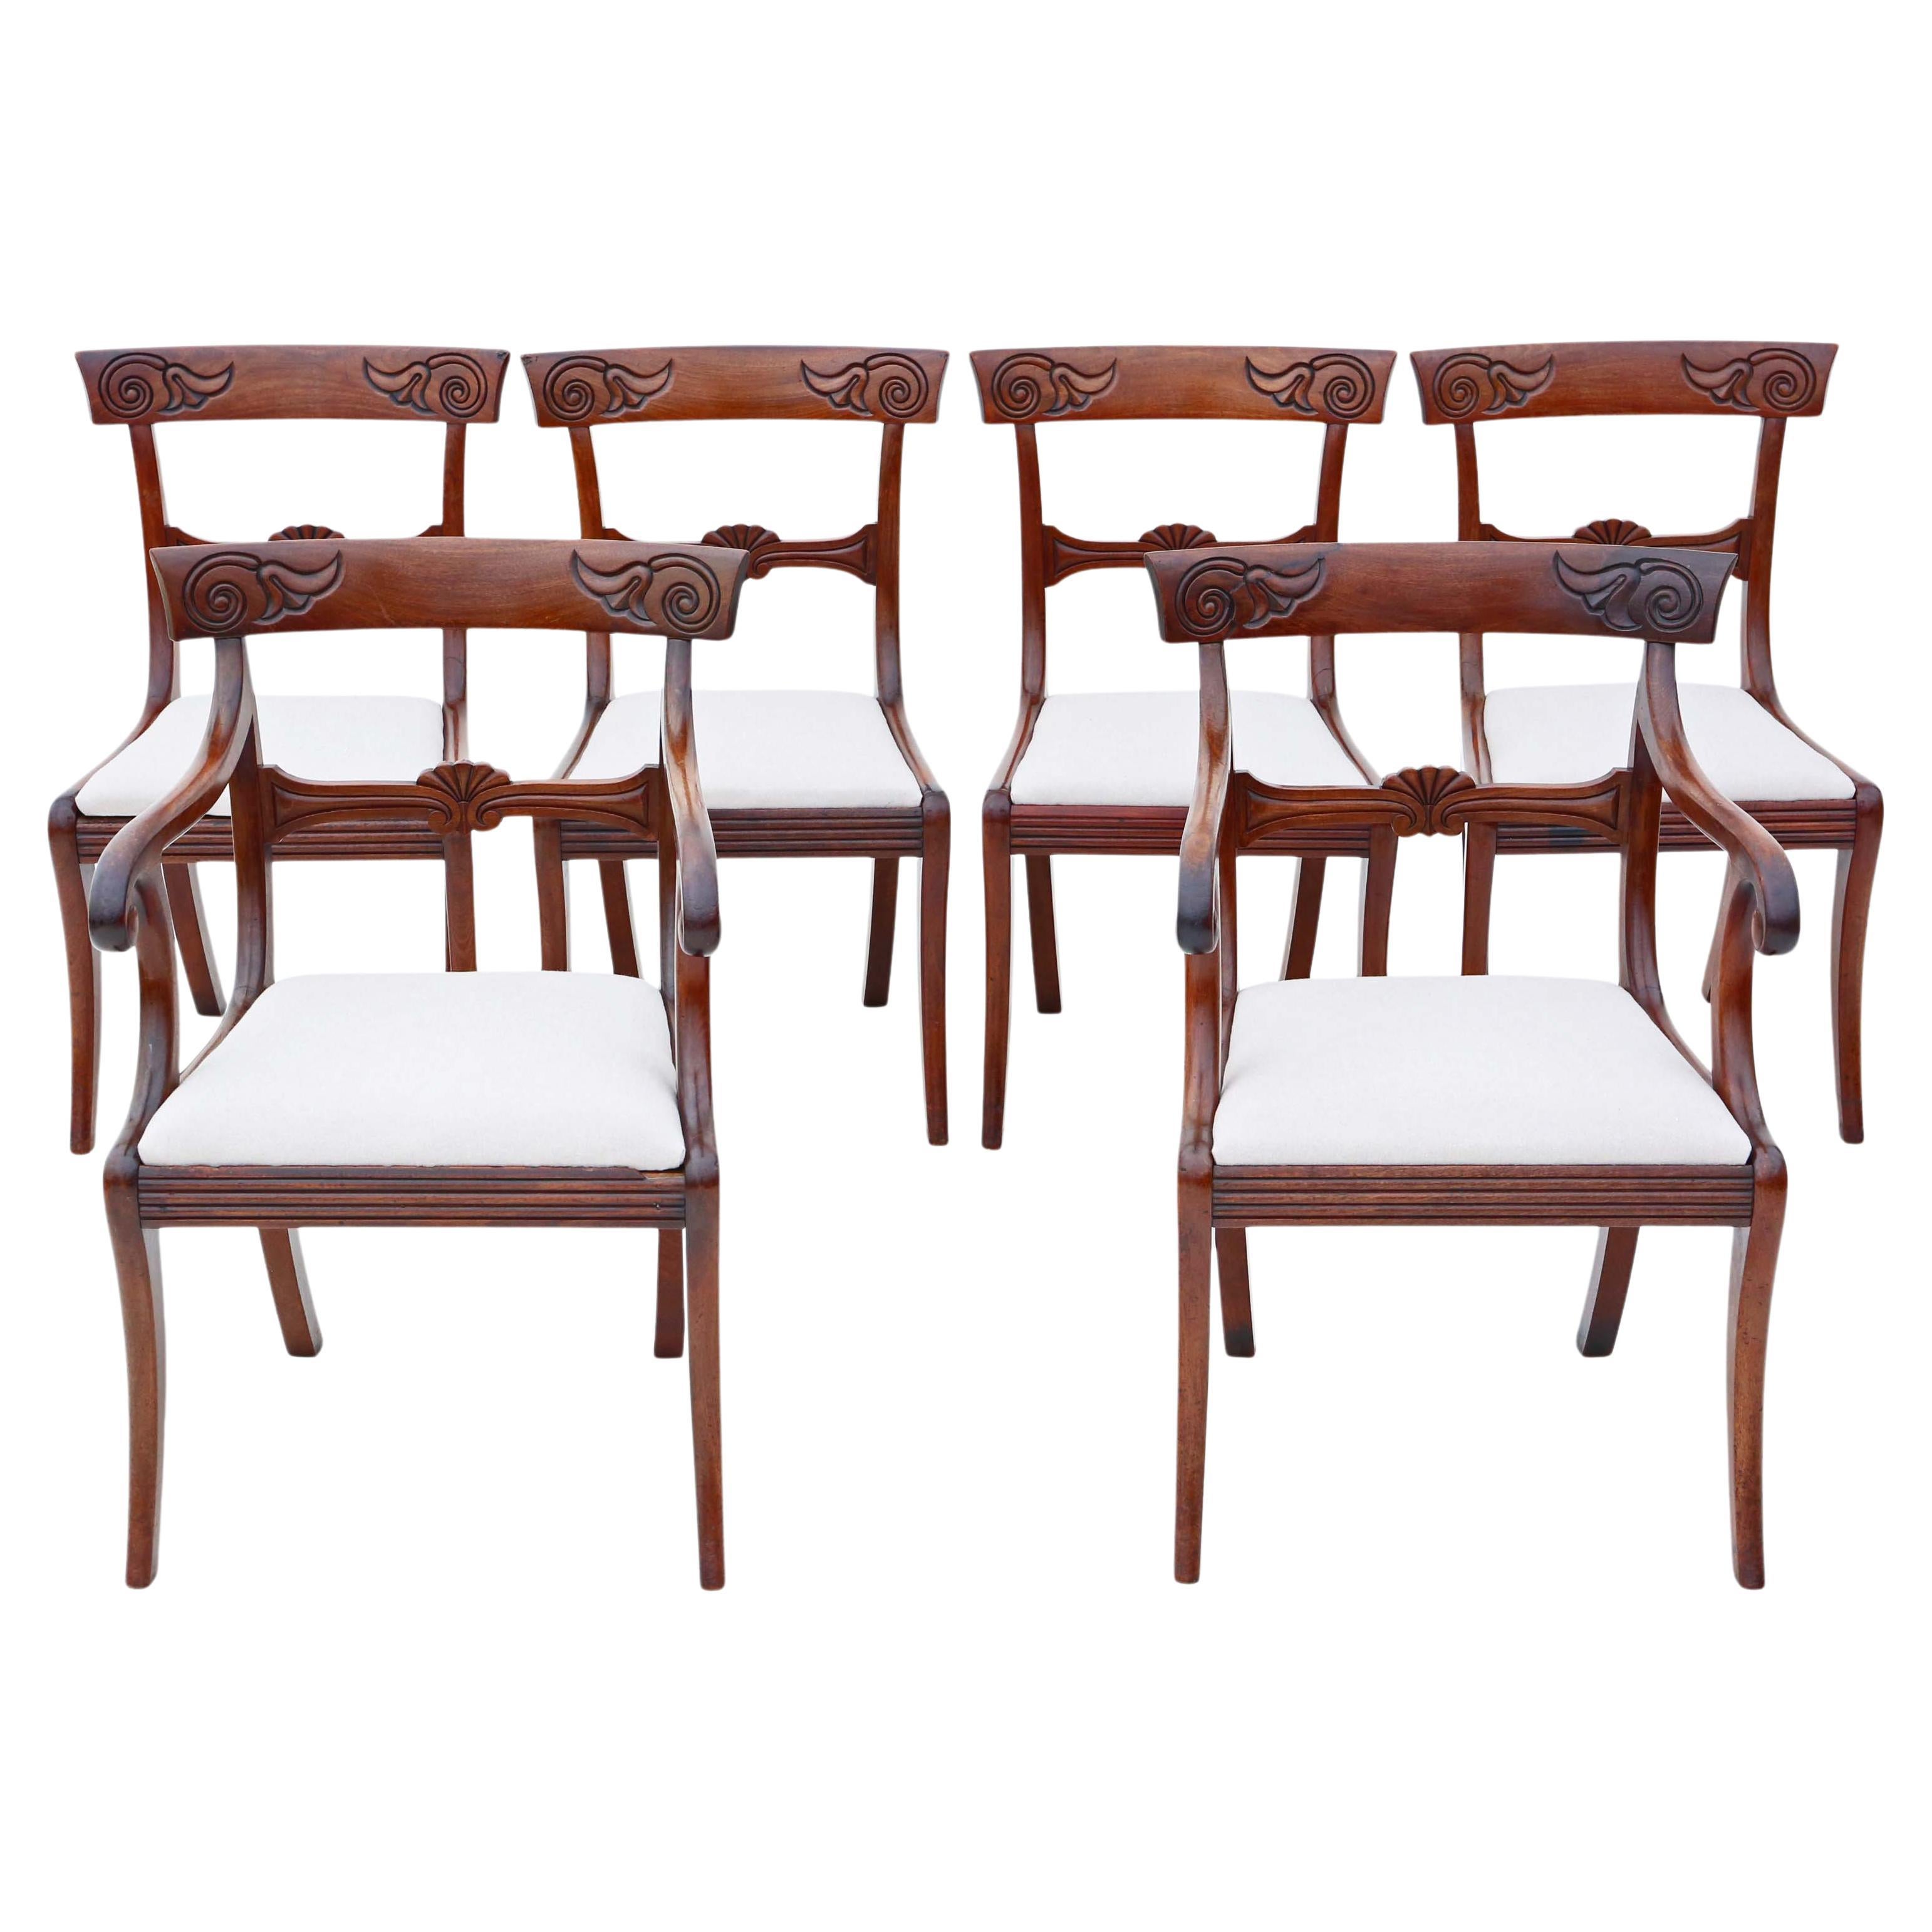 Regency Cuban Mahogany Dining Chairs: Set of 6 (4+2), Antique Quality, C1825 For Sale